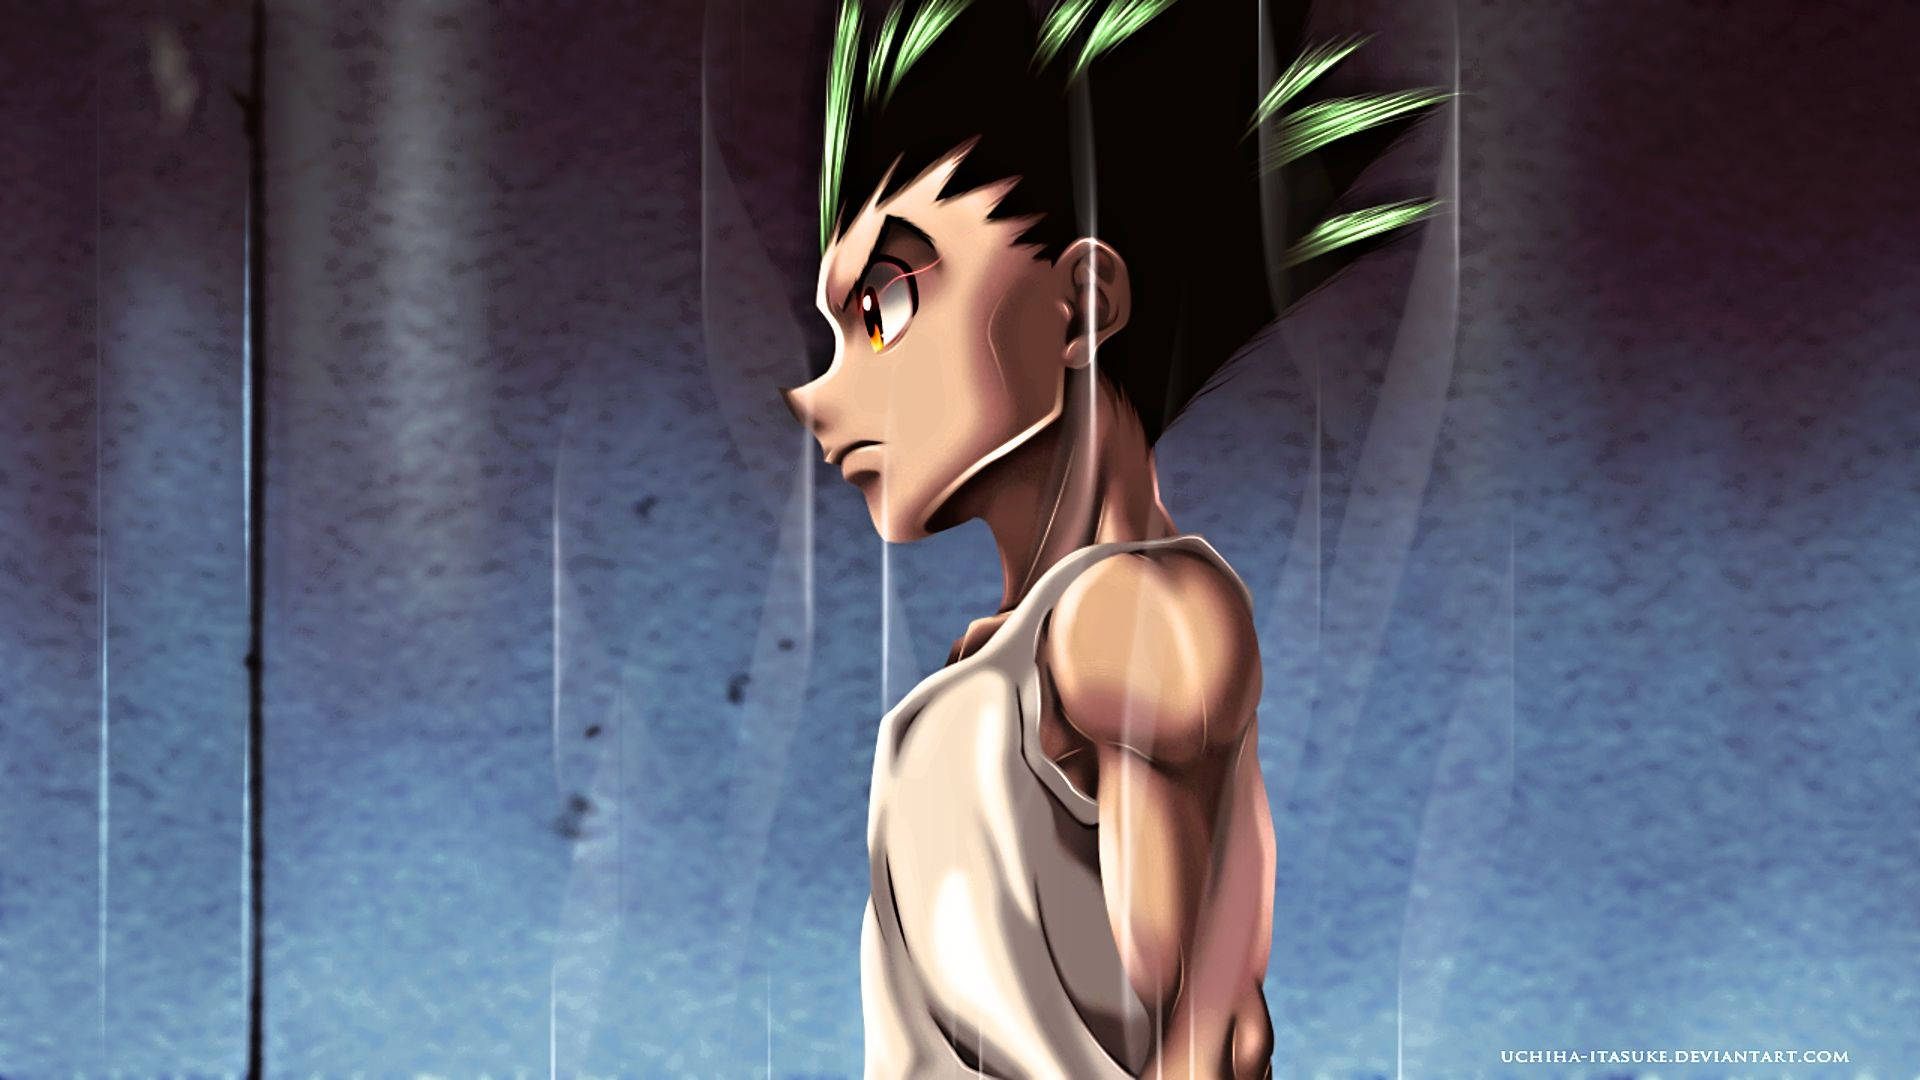 Top 999+ Gon Wallpaper Full HD, 4K✅Free to Use